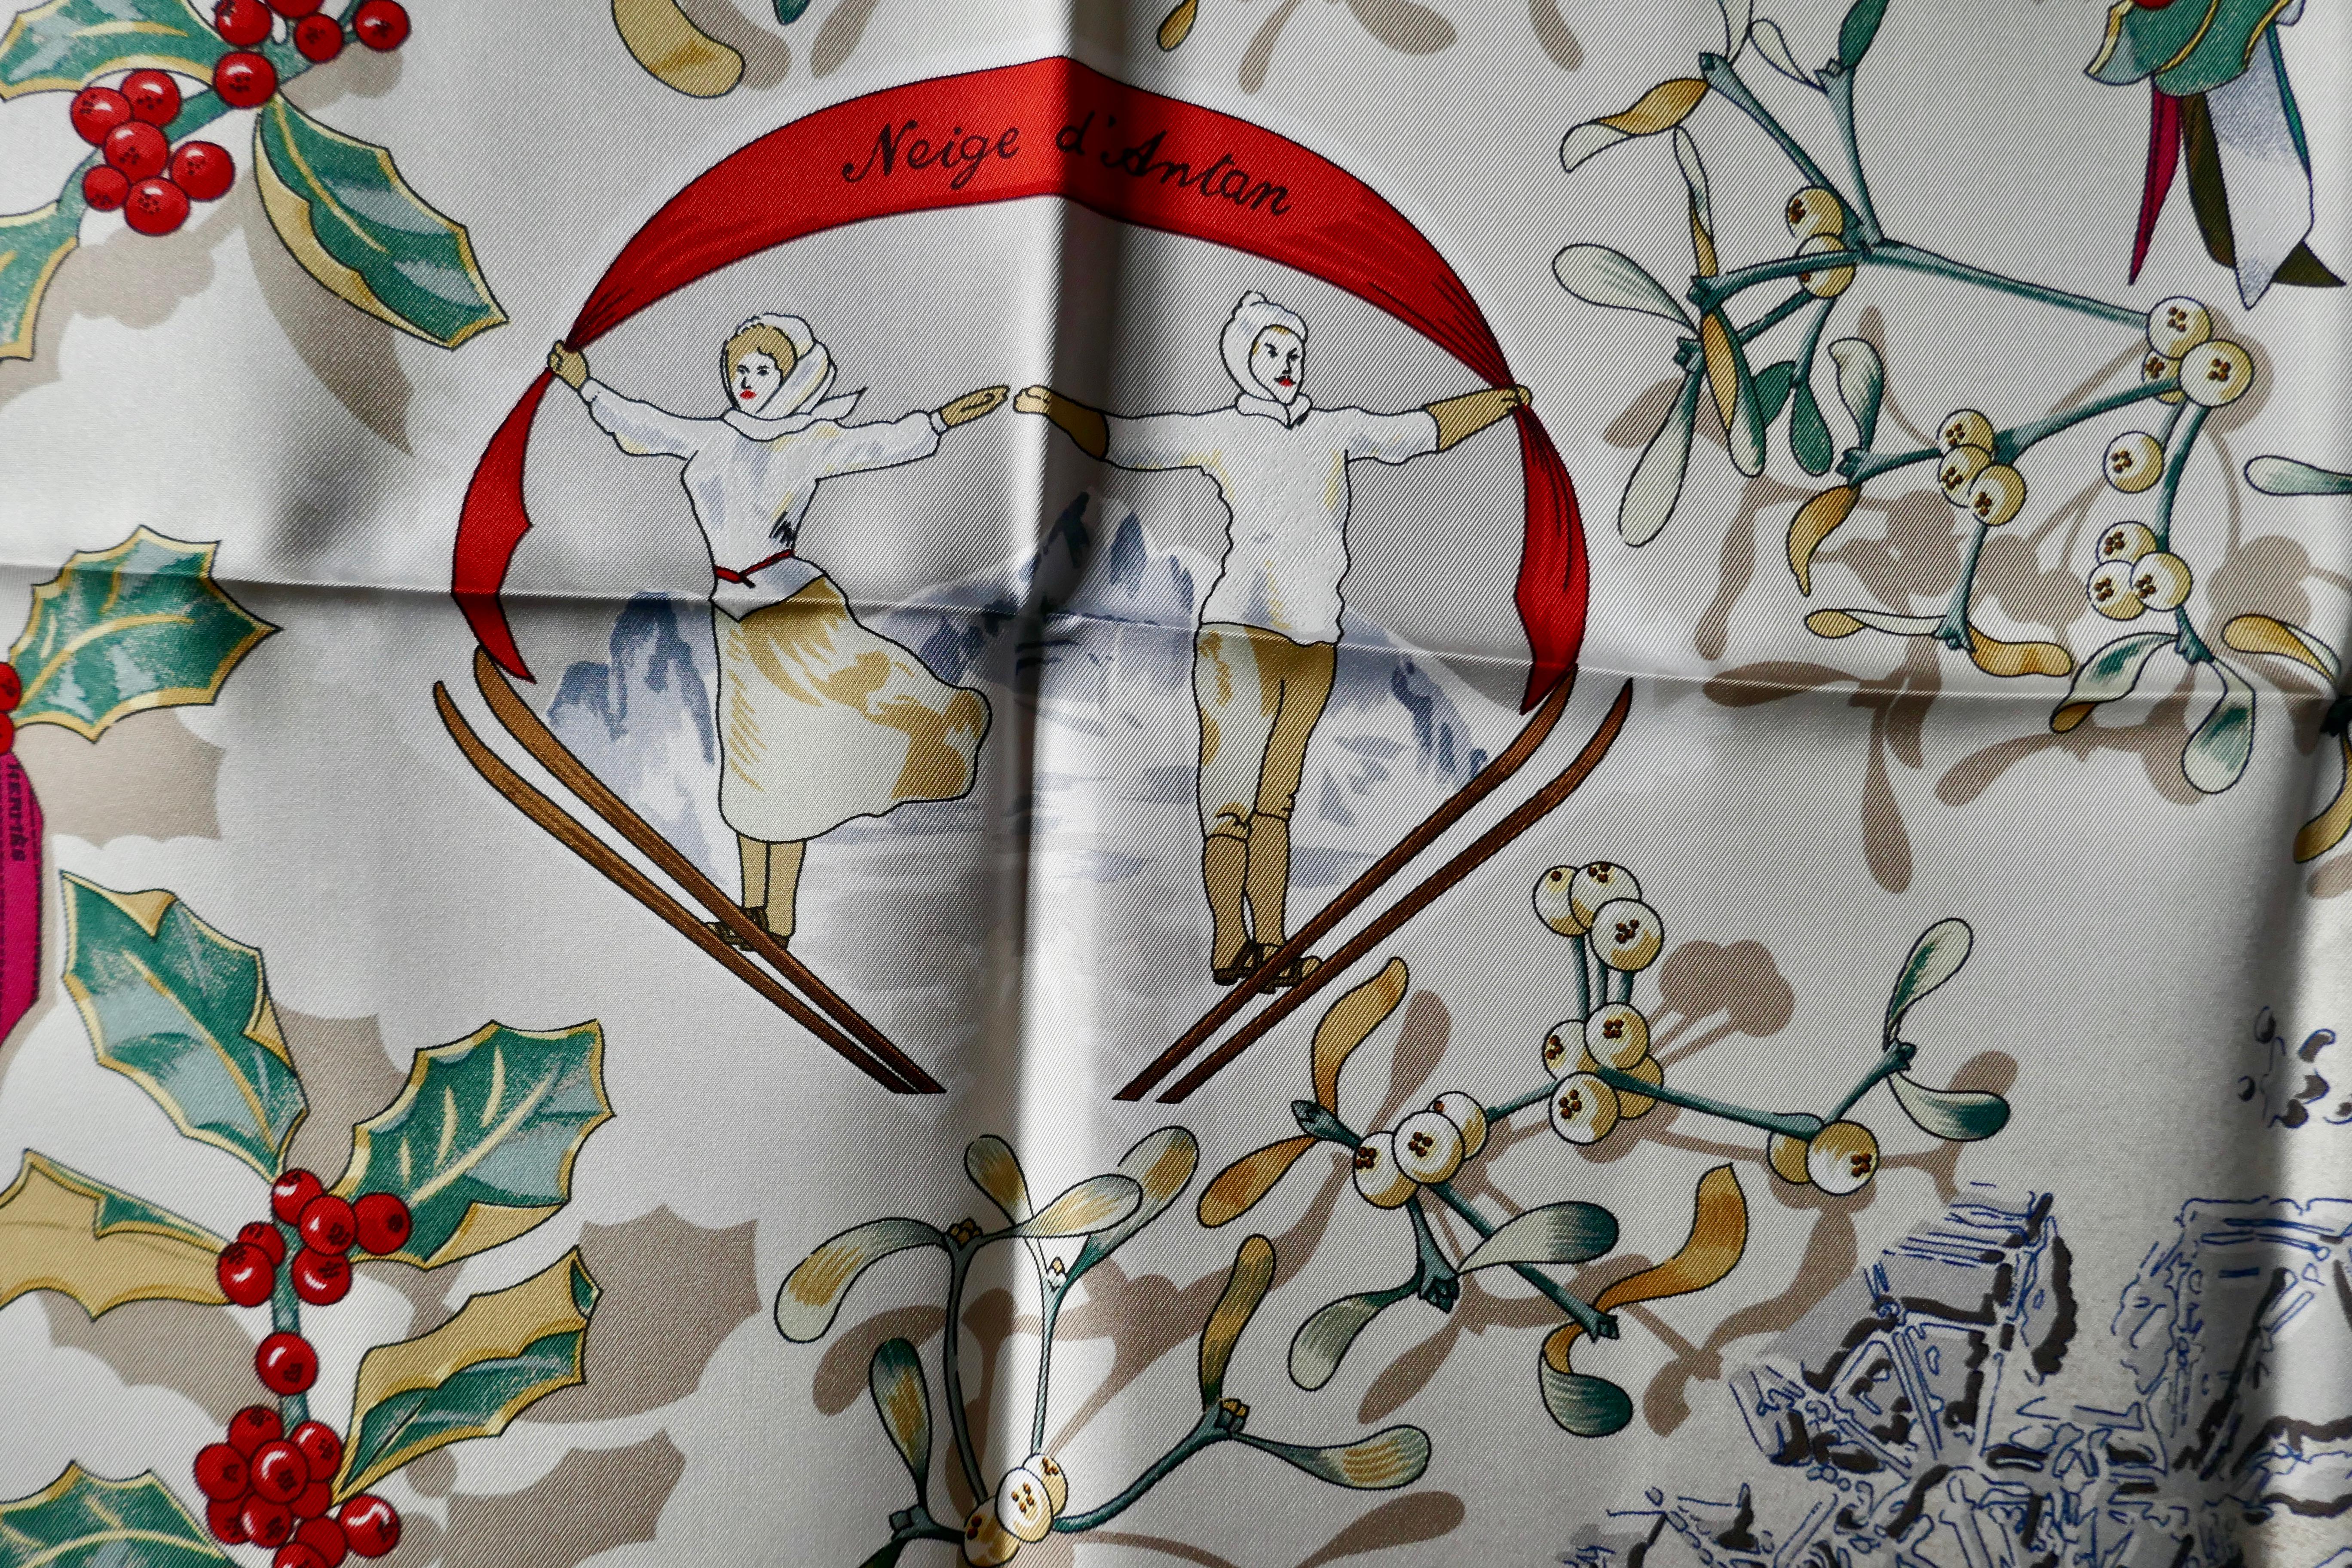 HERMÈS Silk Scarf “Niege d’Aantar” (Snow) designed by Caty Latham, 1989 

A snow scene from the past with Holly, Mistletoe and other winter plants, covered with snow, with very rare colorway, Black Border and very bright red and green foliage,